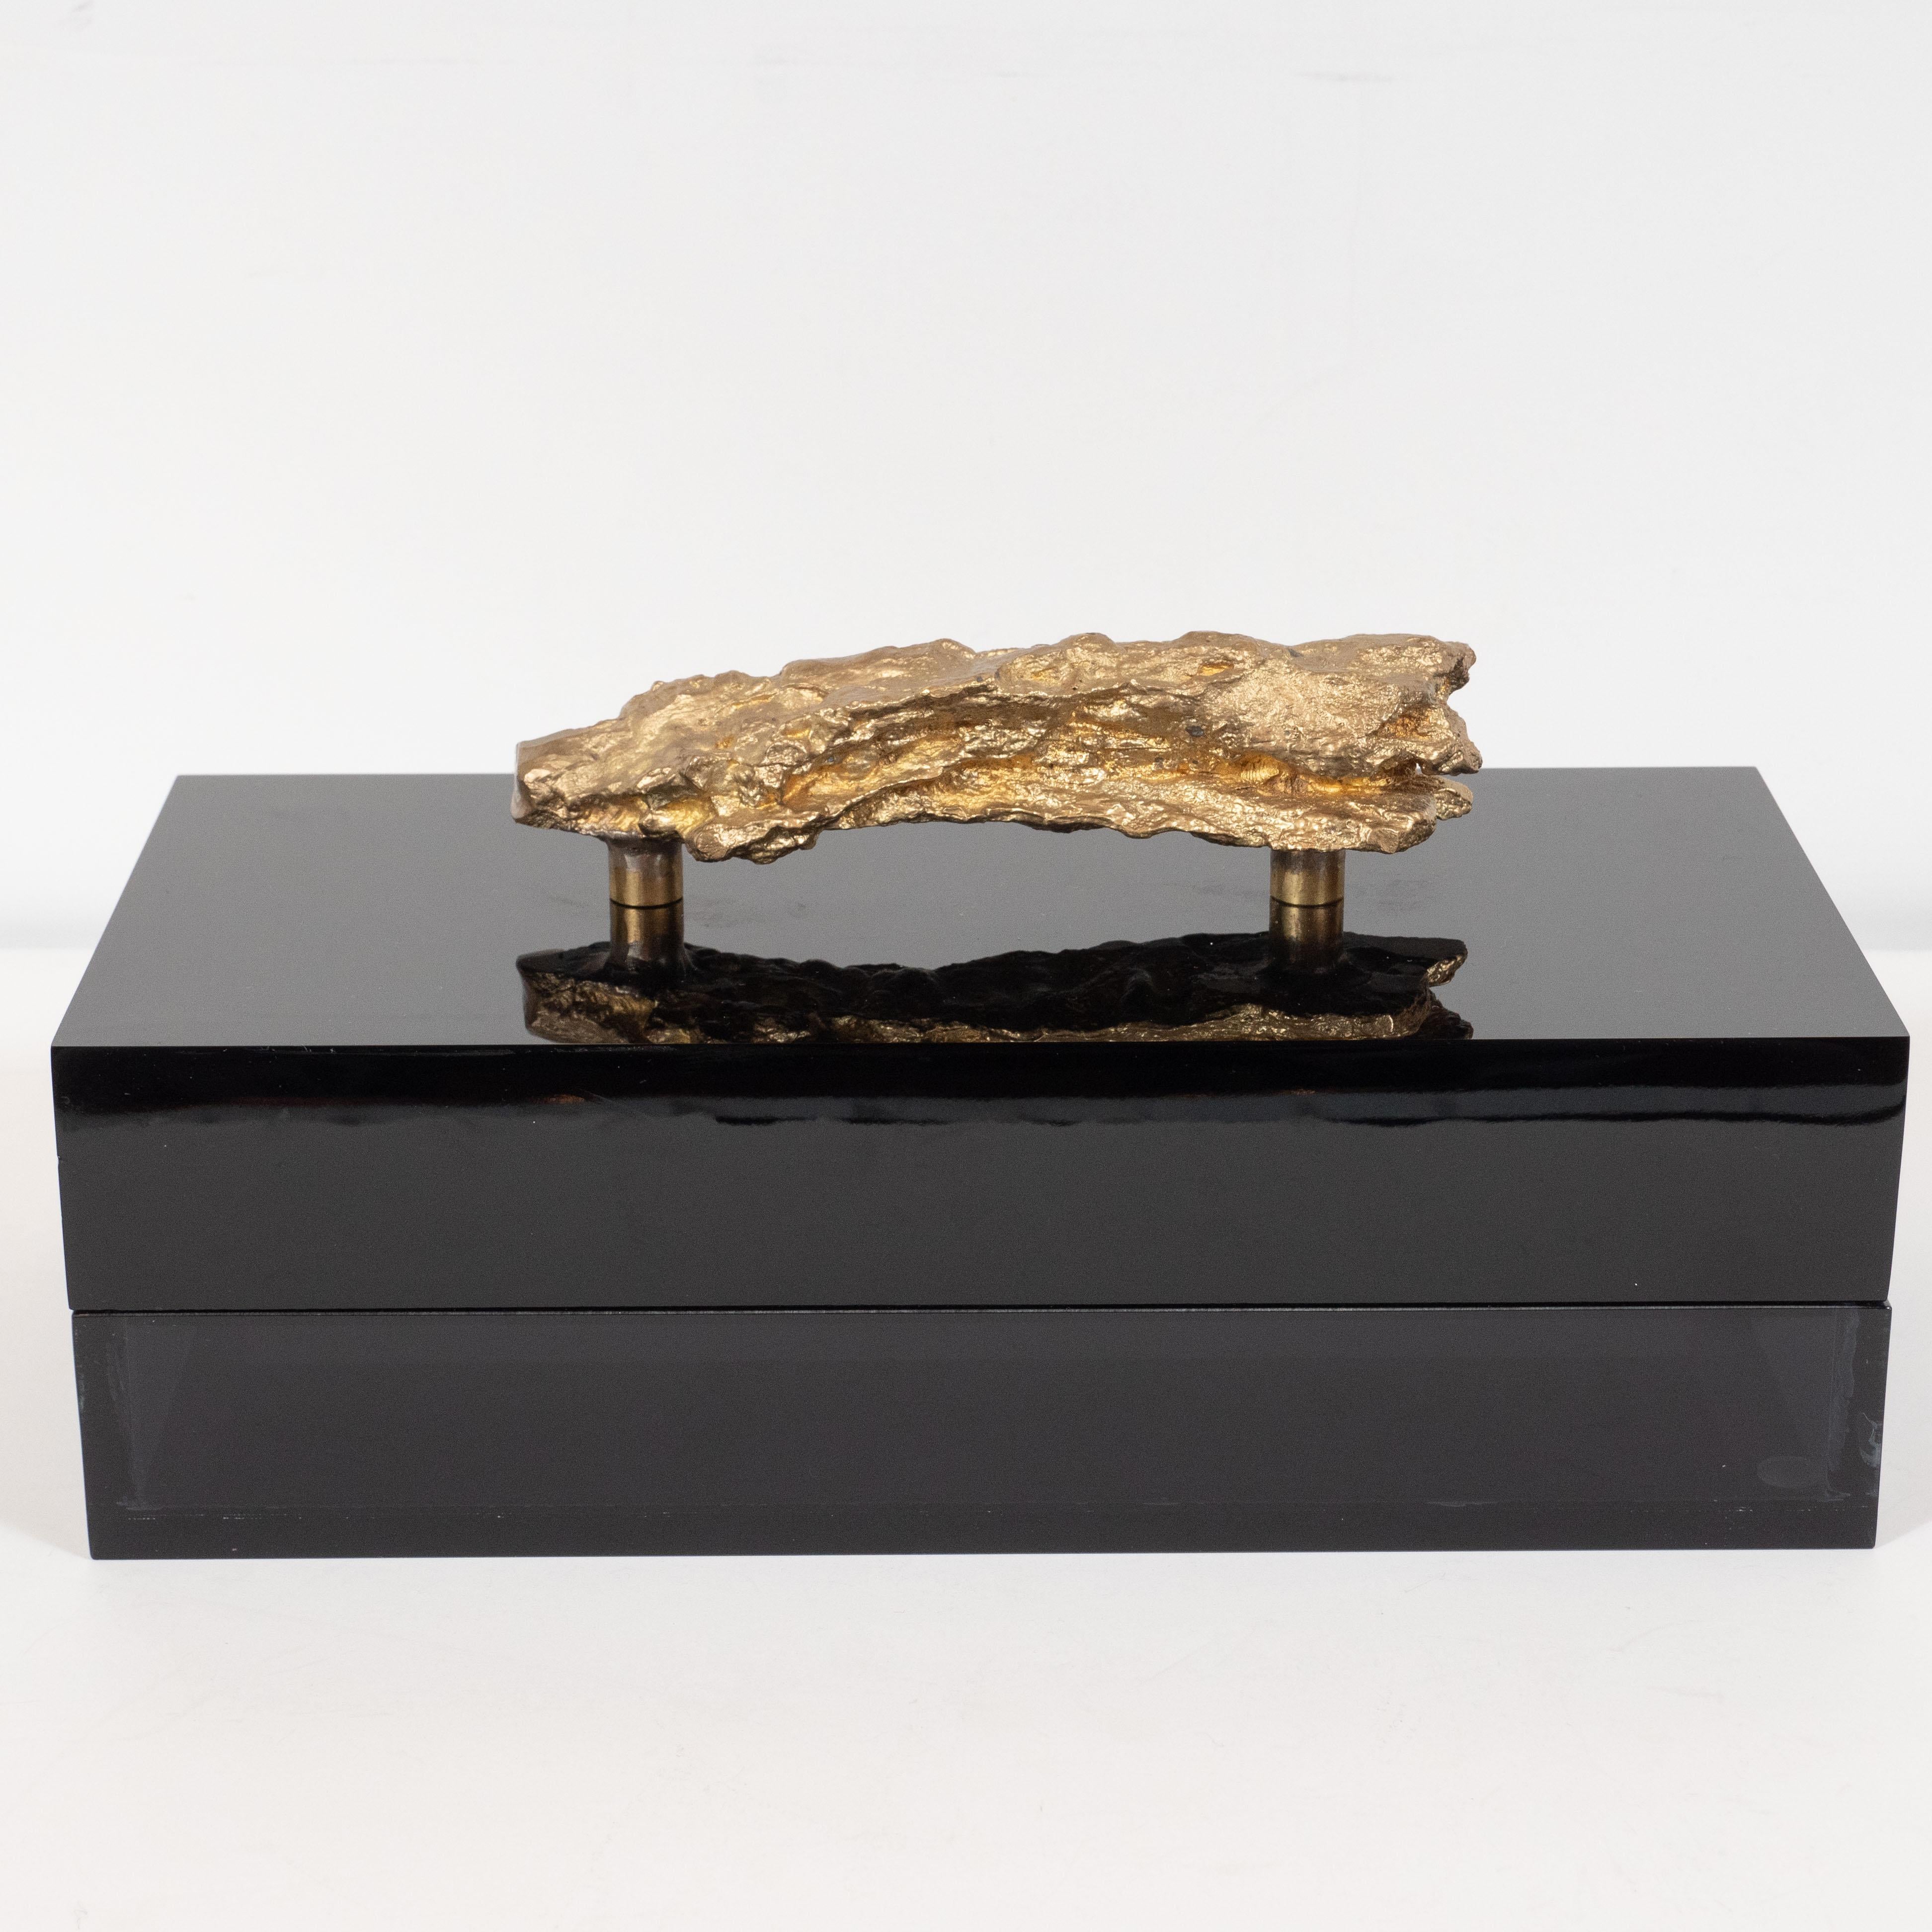 This sophisticated modernist Brutalist box offers a volumetric rectangular black Lucite body with an organic abstracted gilded metal pull suggesting an oversized gold nugget or a large fossilized stone. The organic texture of the cast metal stone